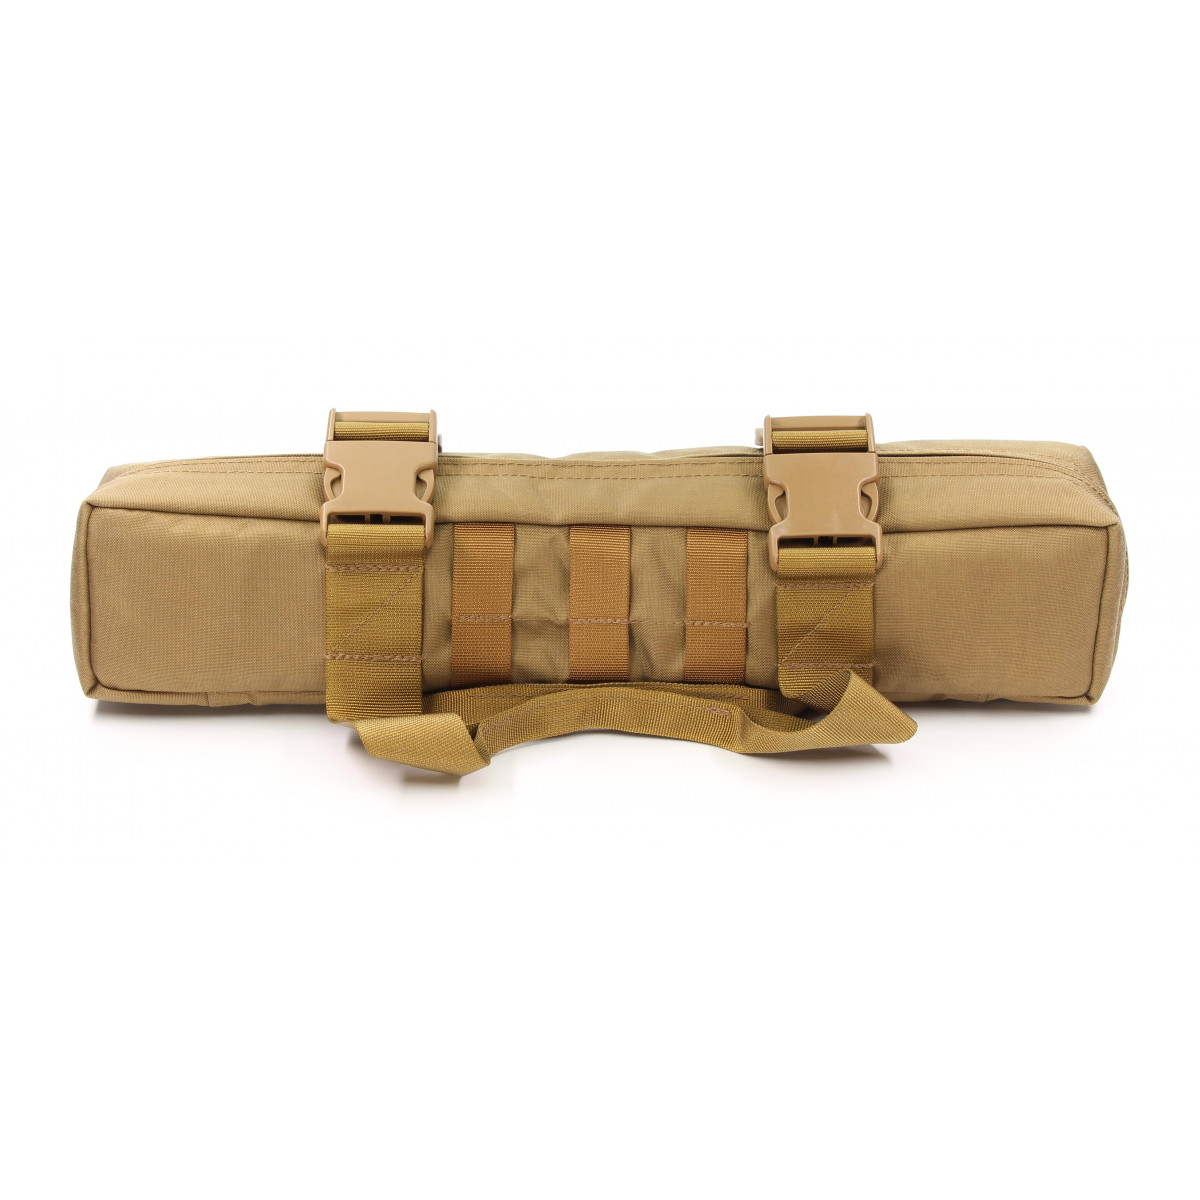 padded protective bag for scopes in coyote